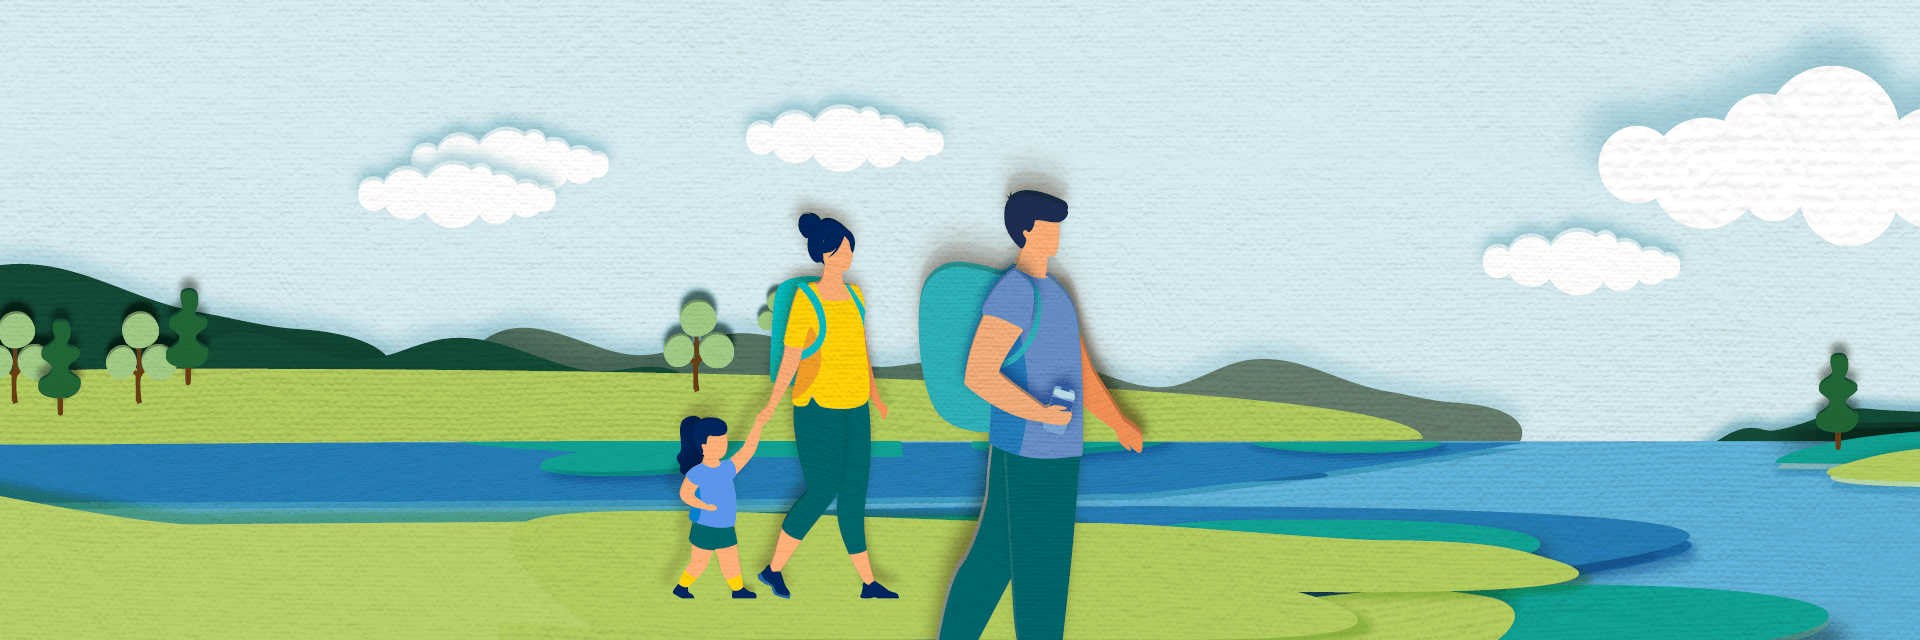 Illustration of a family walking by a river